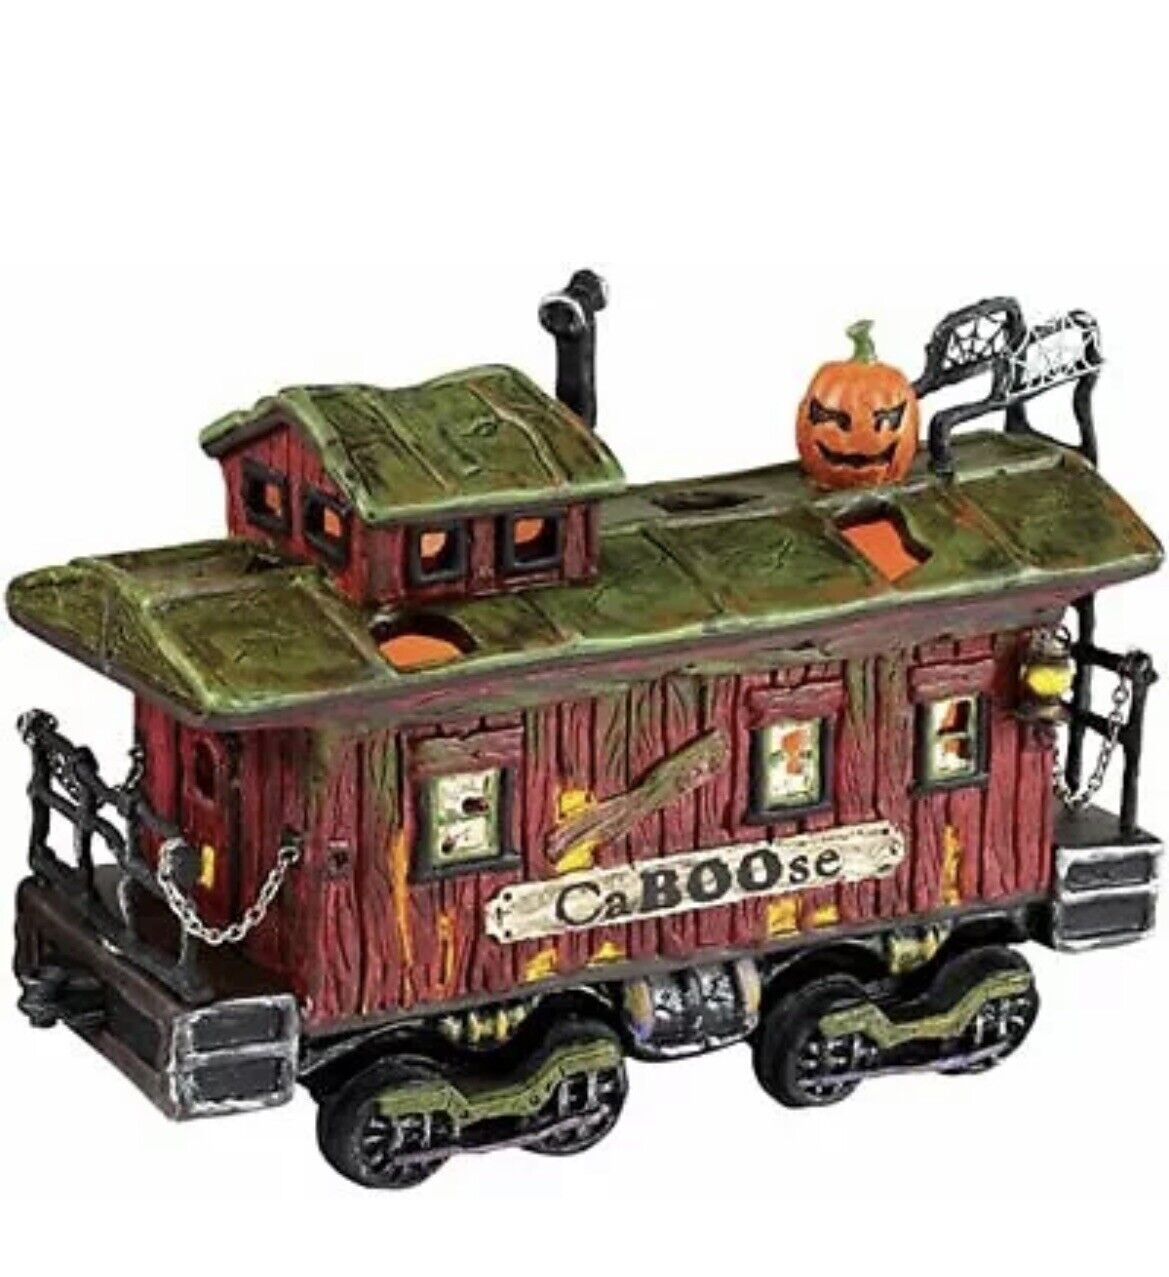 Department 56 Halloween Haunted Rails Caboose Train Car New in Box Sealed